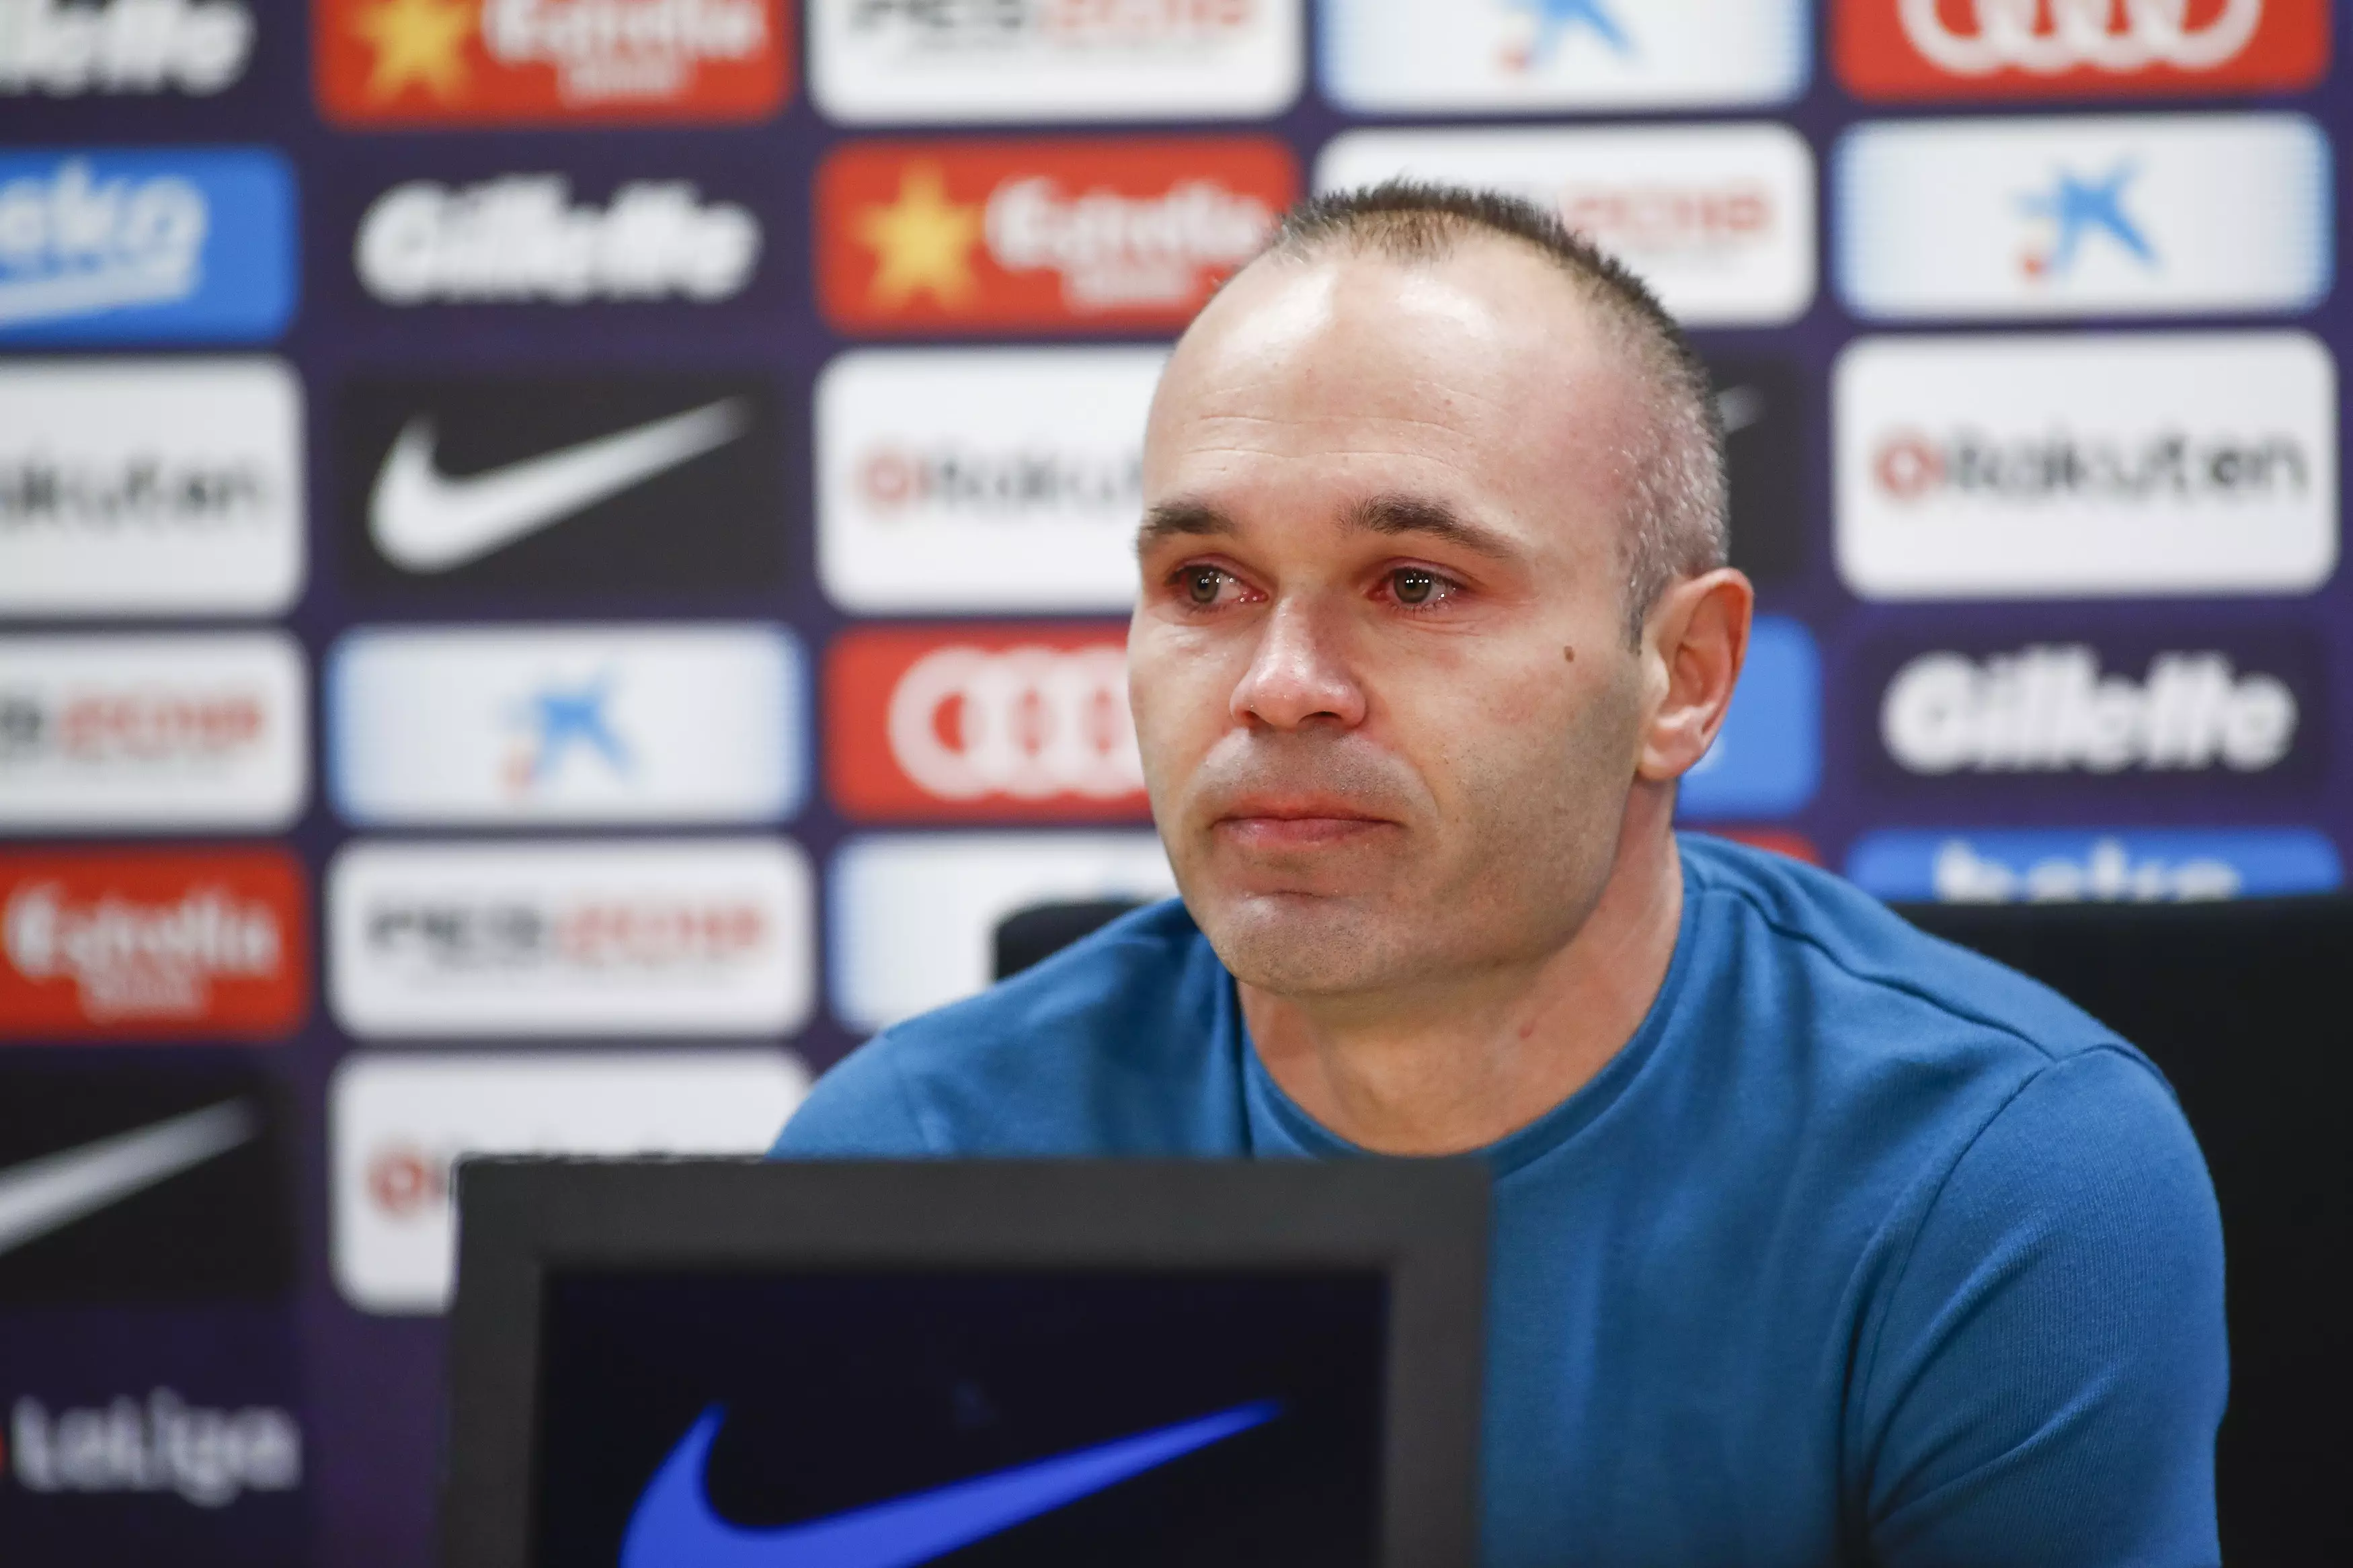 There were emotional scenes when Iniesta announced he was leaving the Camp Nou. Image: PA Images